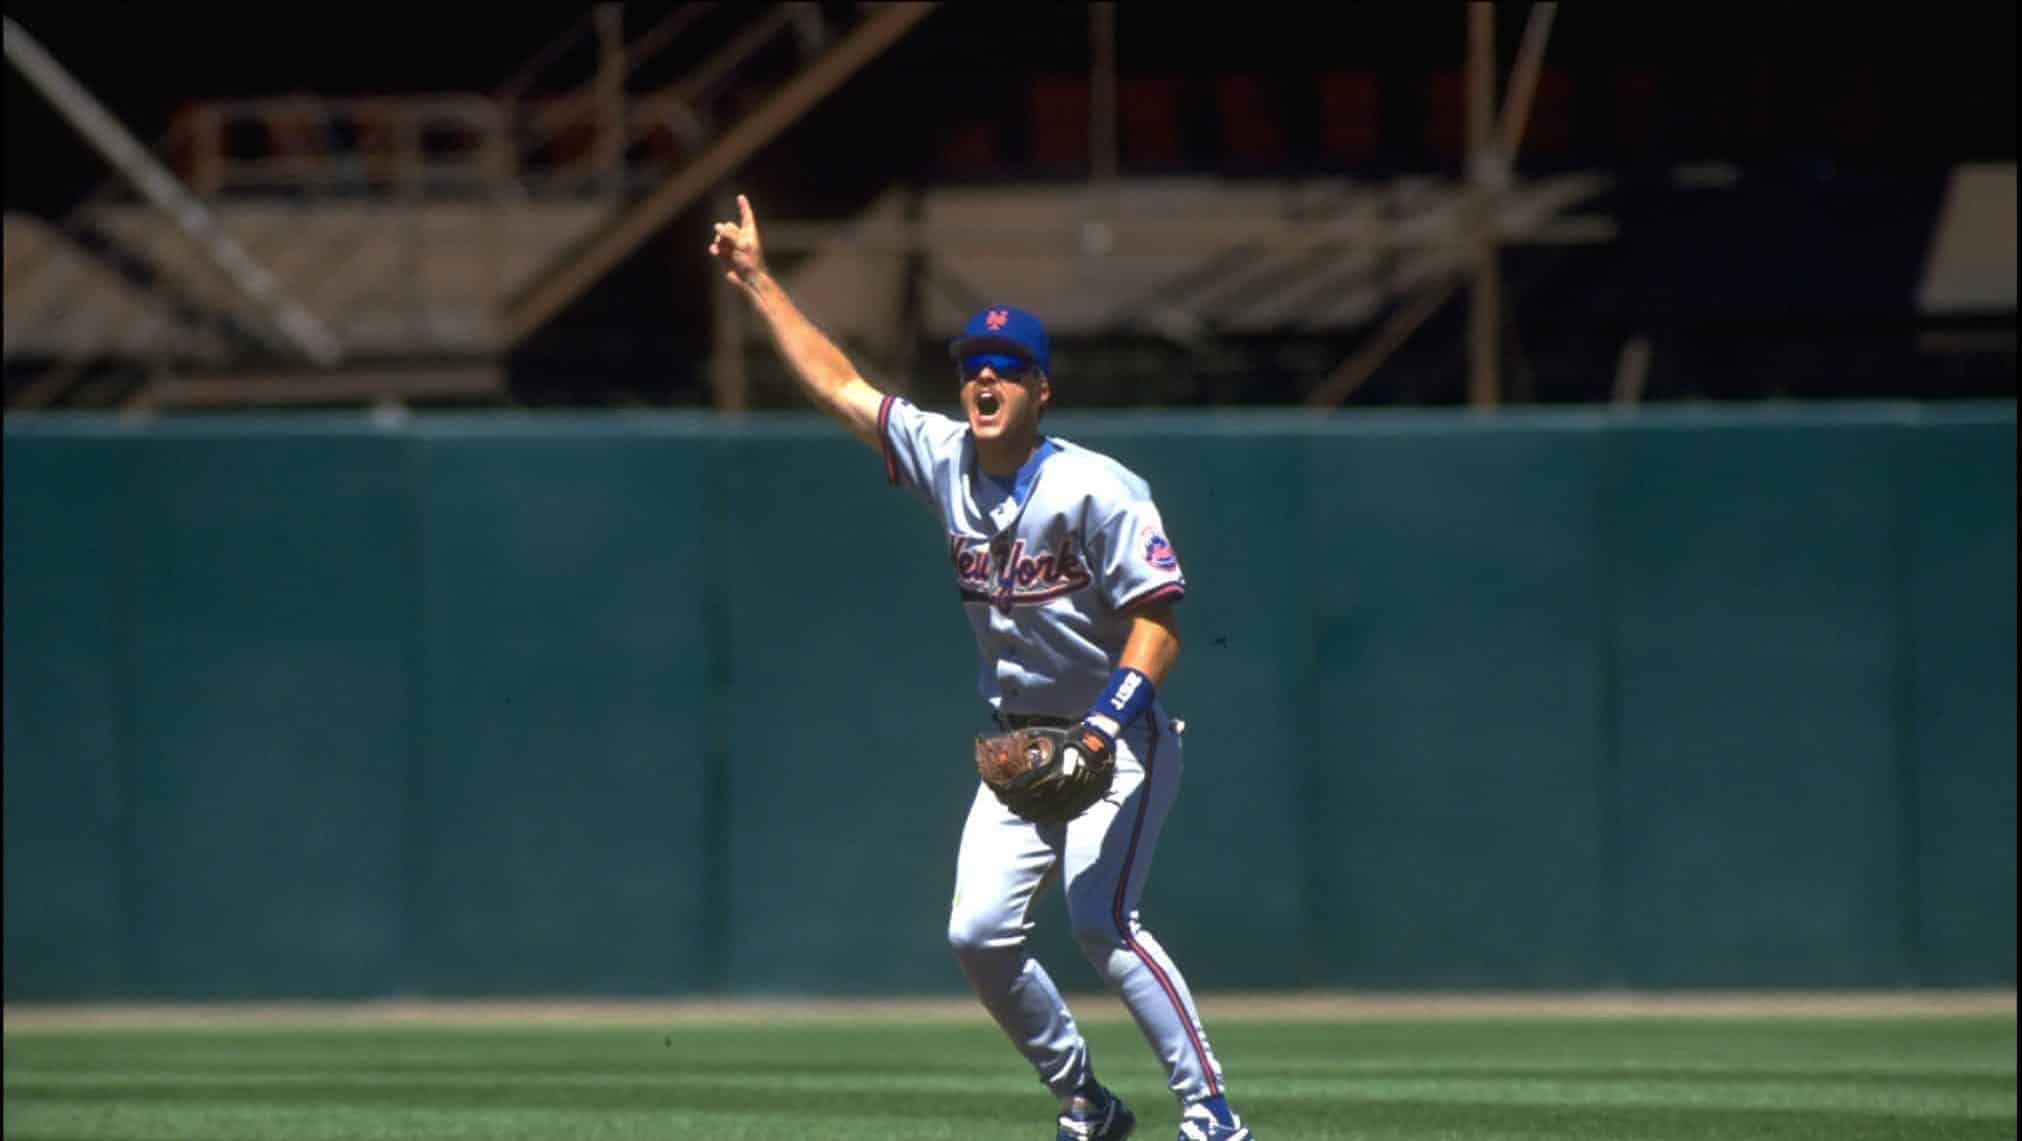 19 JUL 1993: JEFF KENT OF THE NEW YORK METS CALLS OUT A FLY BALL AGAINST THE SAN FRANCISCO GIANTS AT CANDLESTICK PARK IN SAN FRANCISCO, CALIFORNIA.